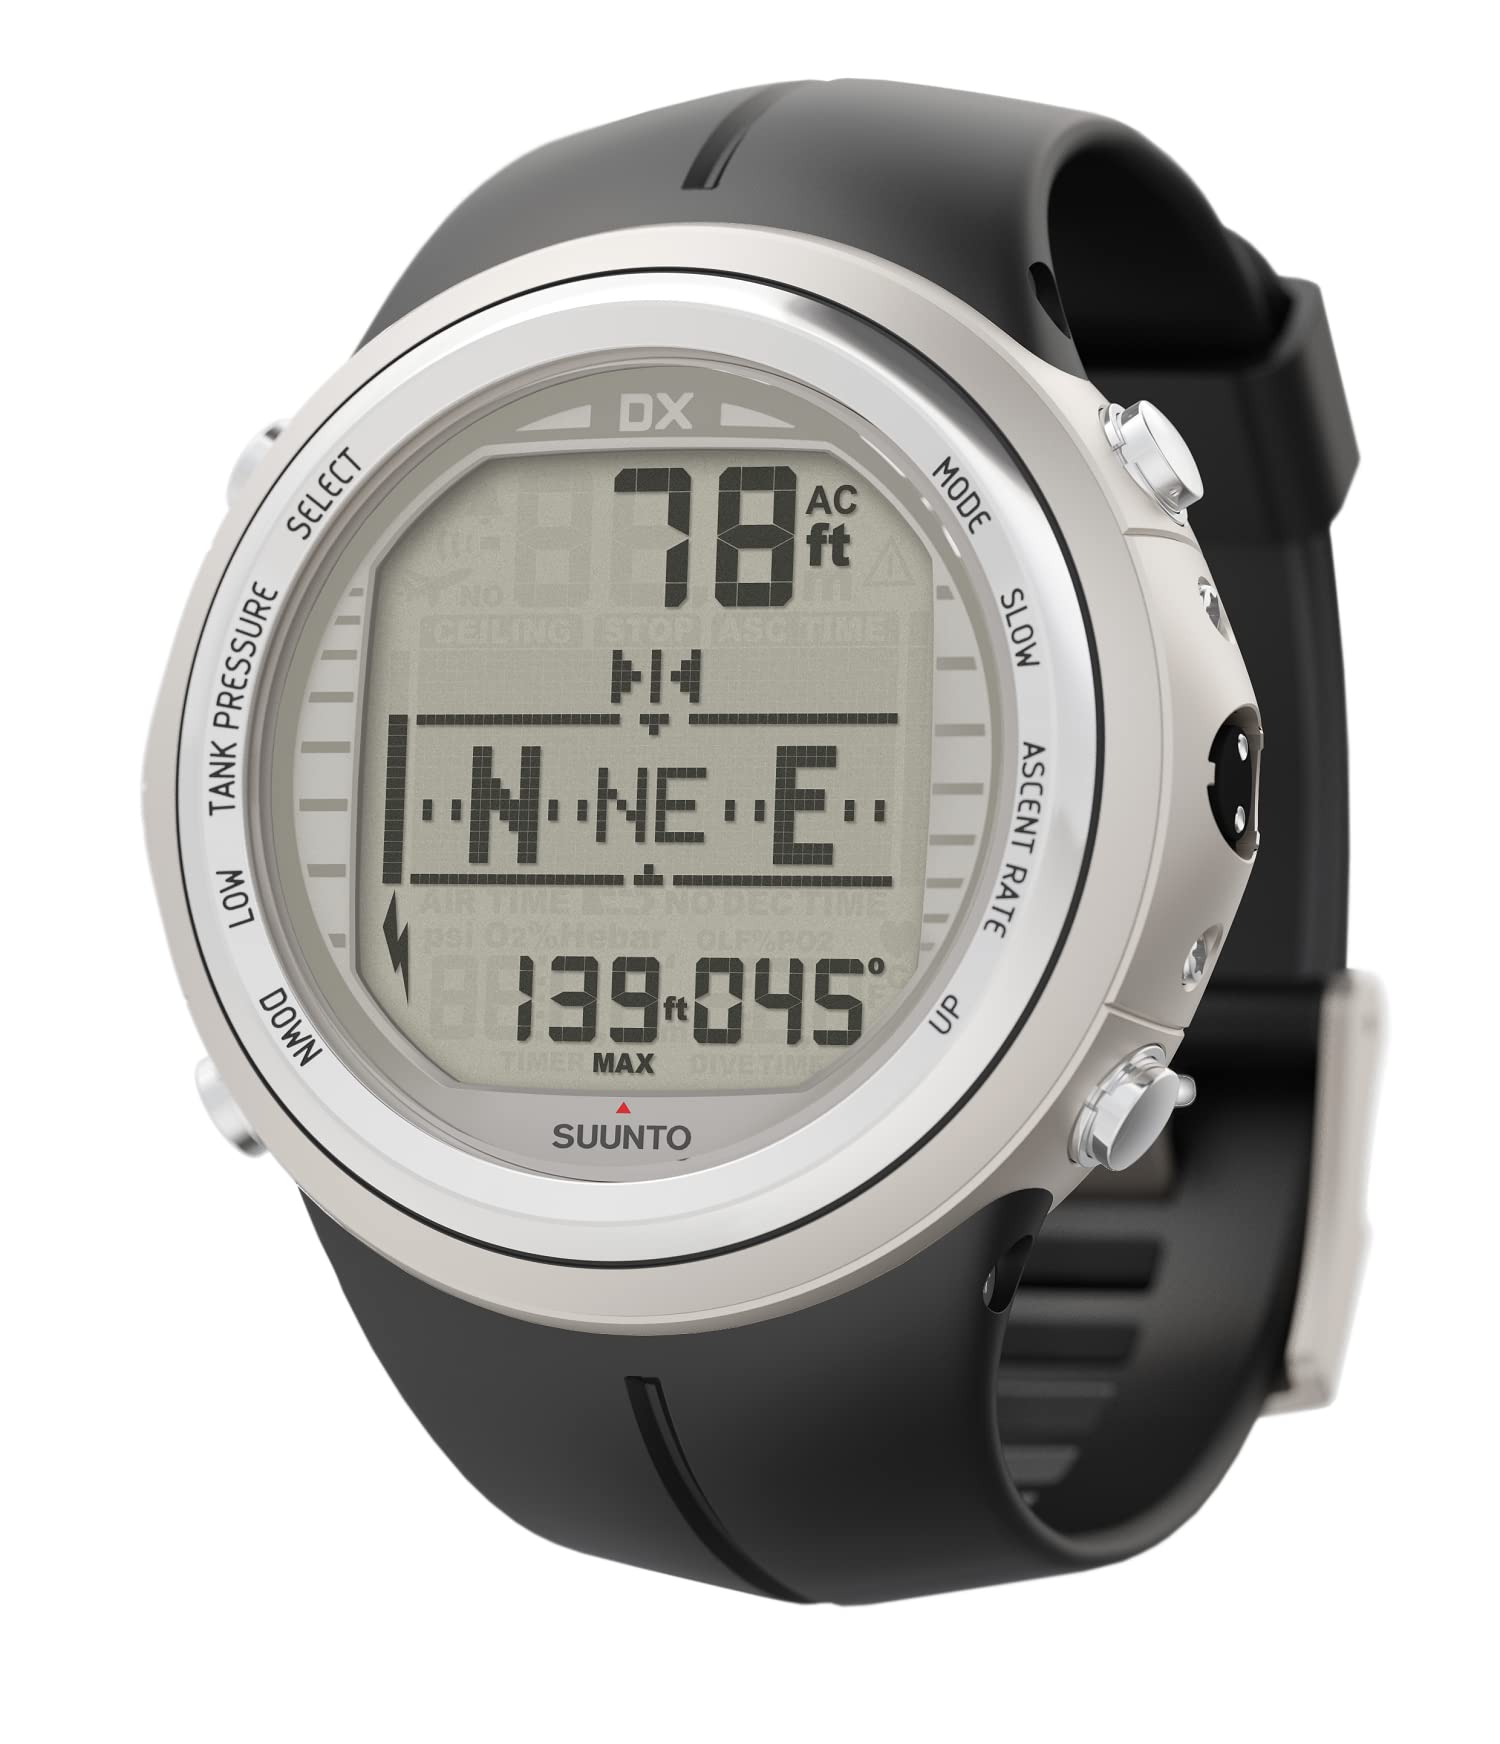 SUUNTO Dx Diving Watch with USB